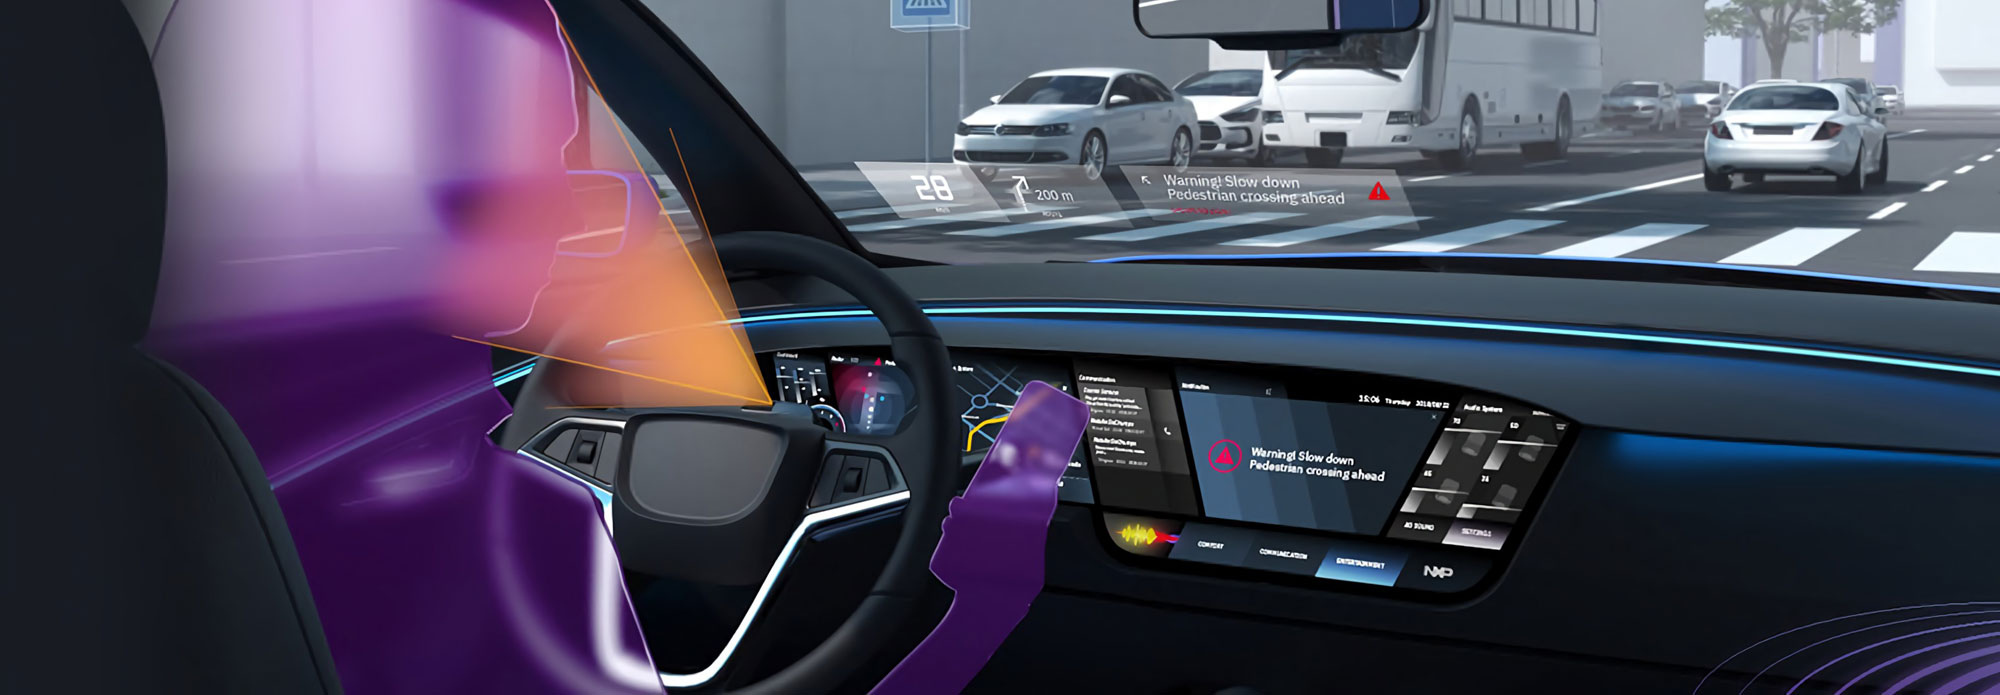 NXP AND MOMENTA COLLABORATE ON AUTOMOTIVEGRADE DRIVER MONITORING SYSTEMS